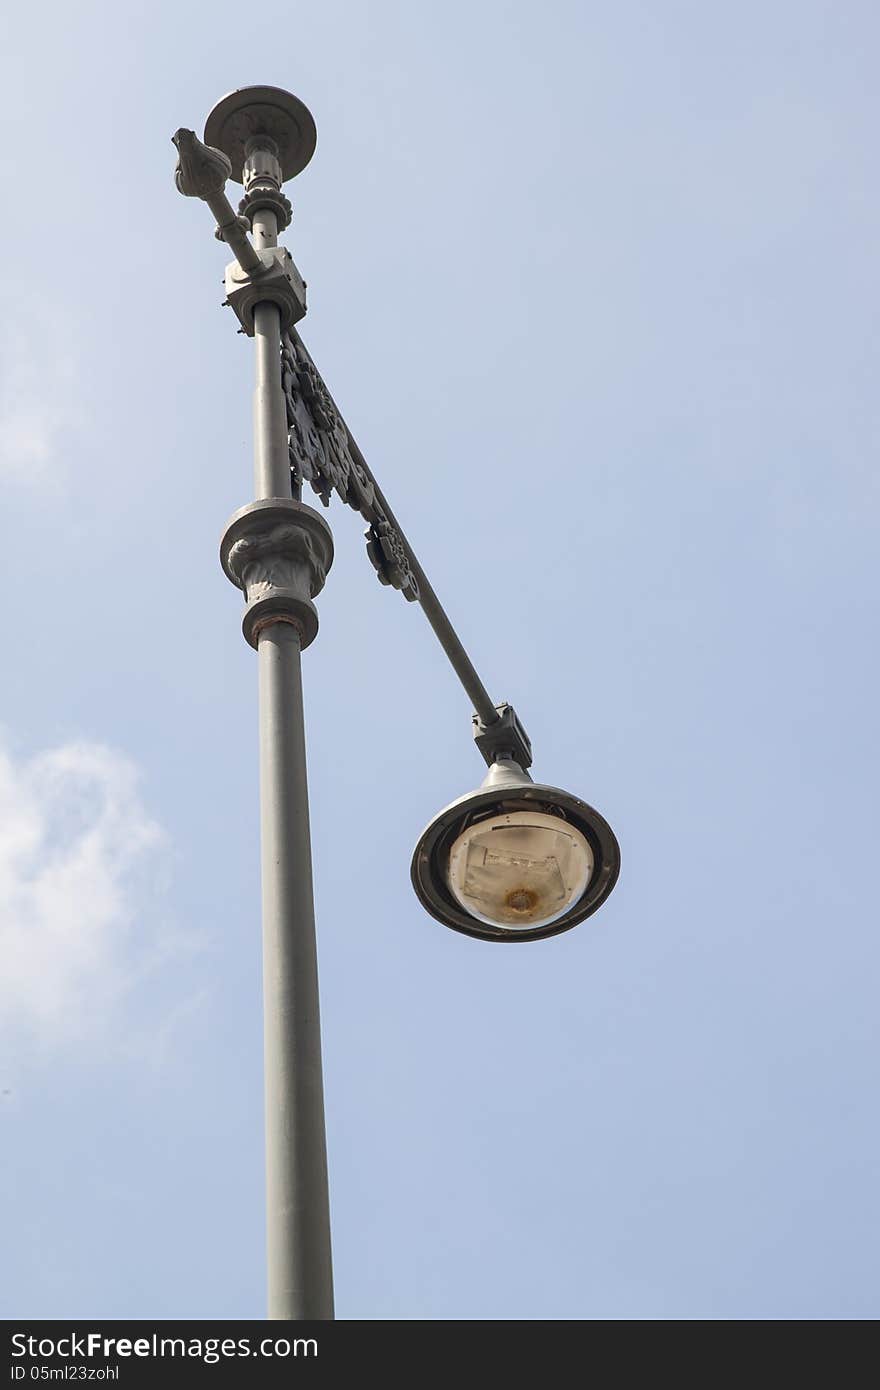 Decorated light pole on the street